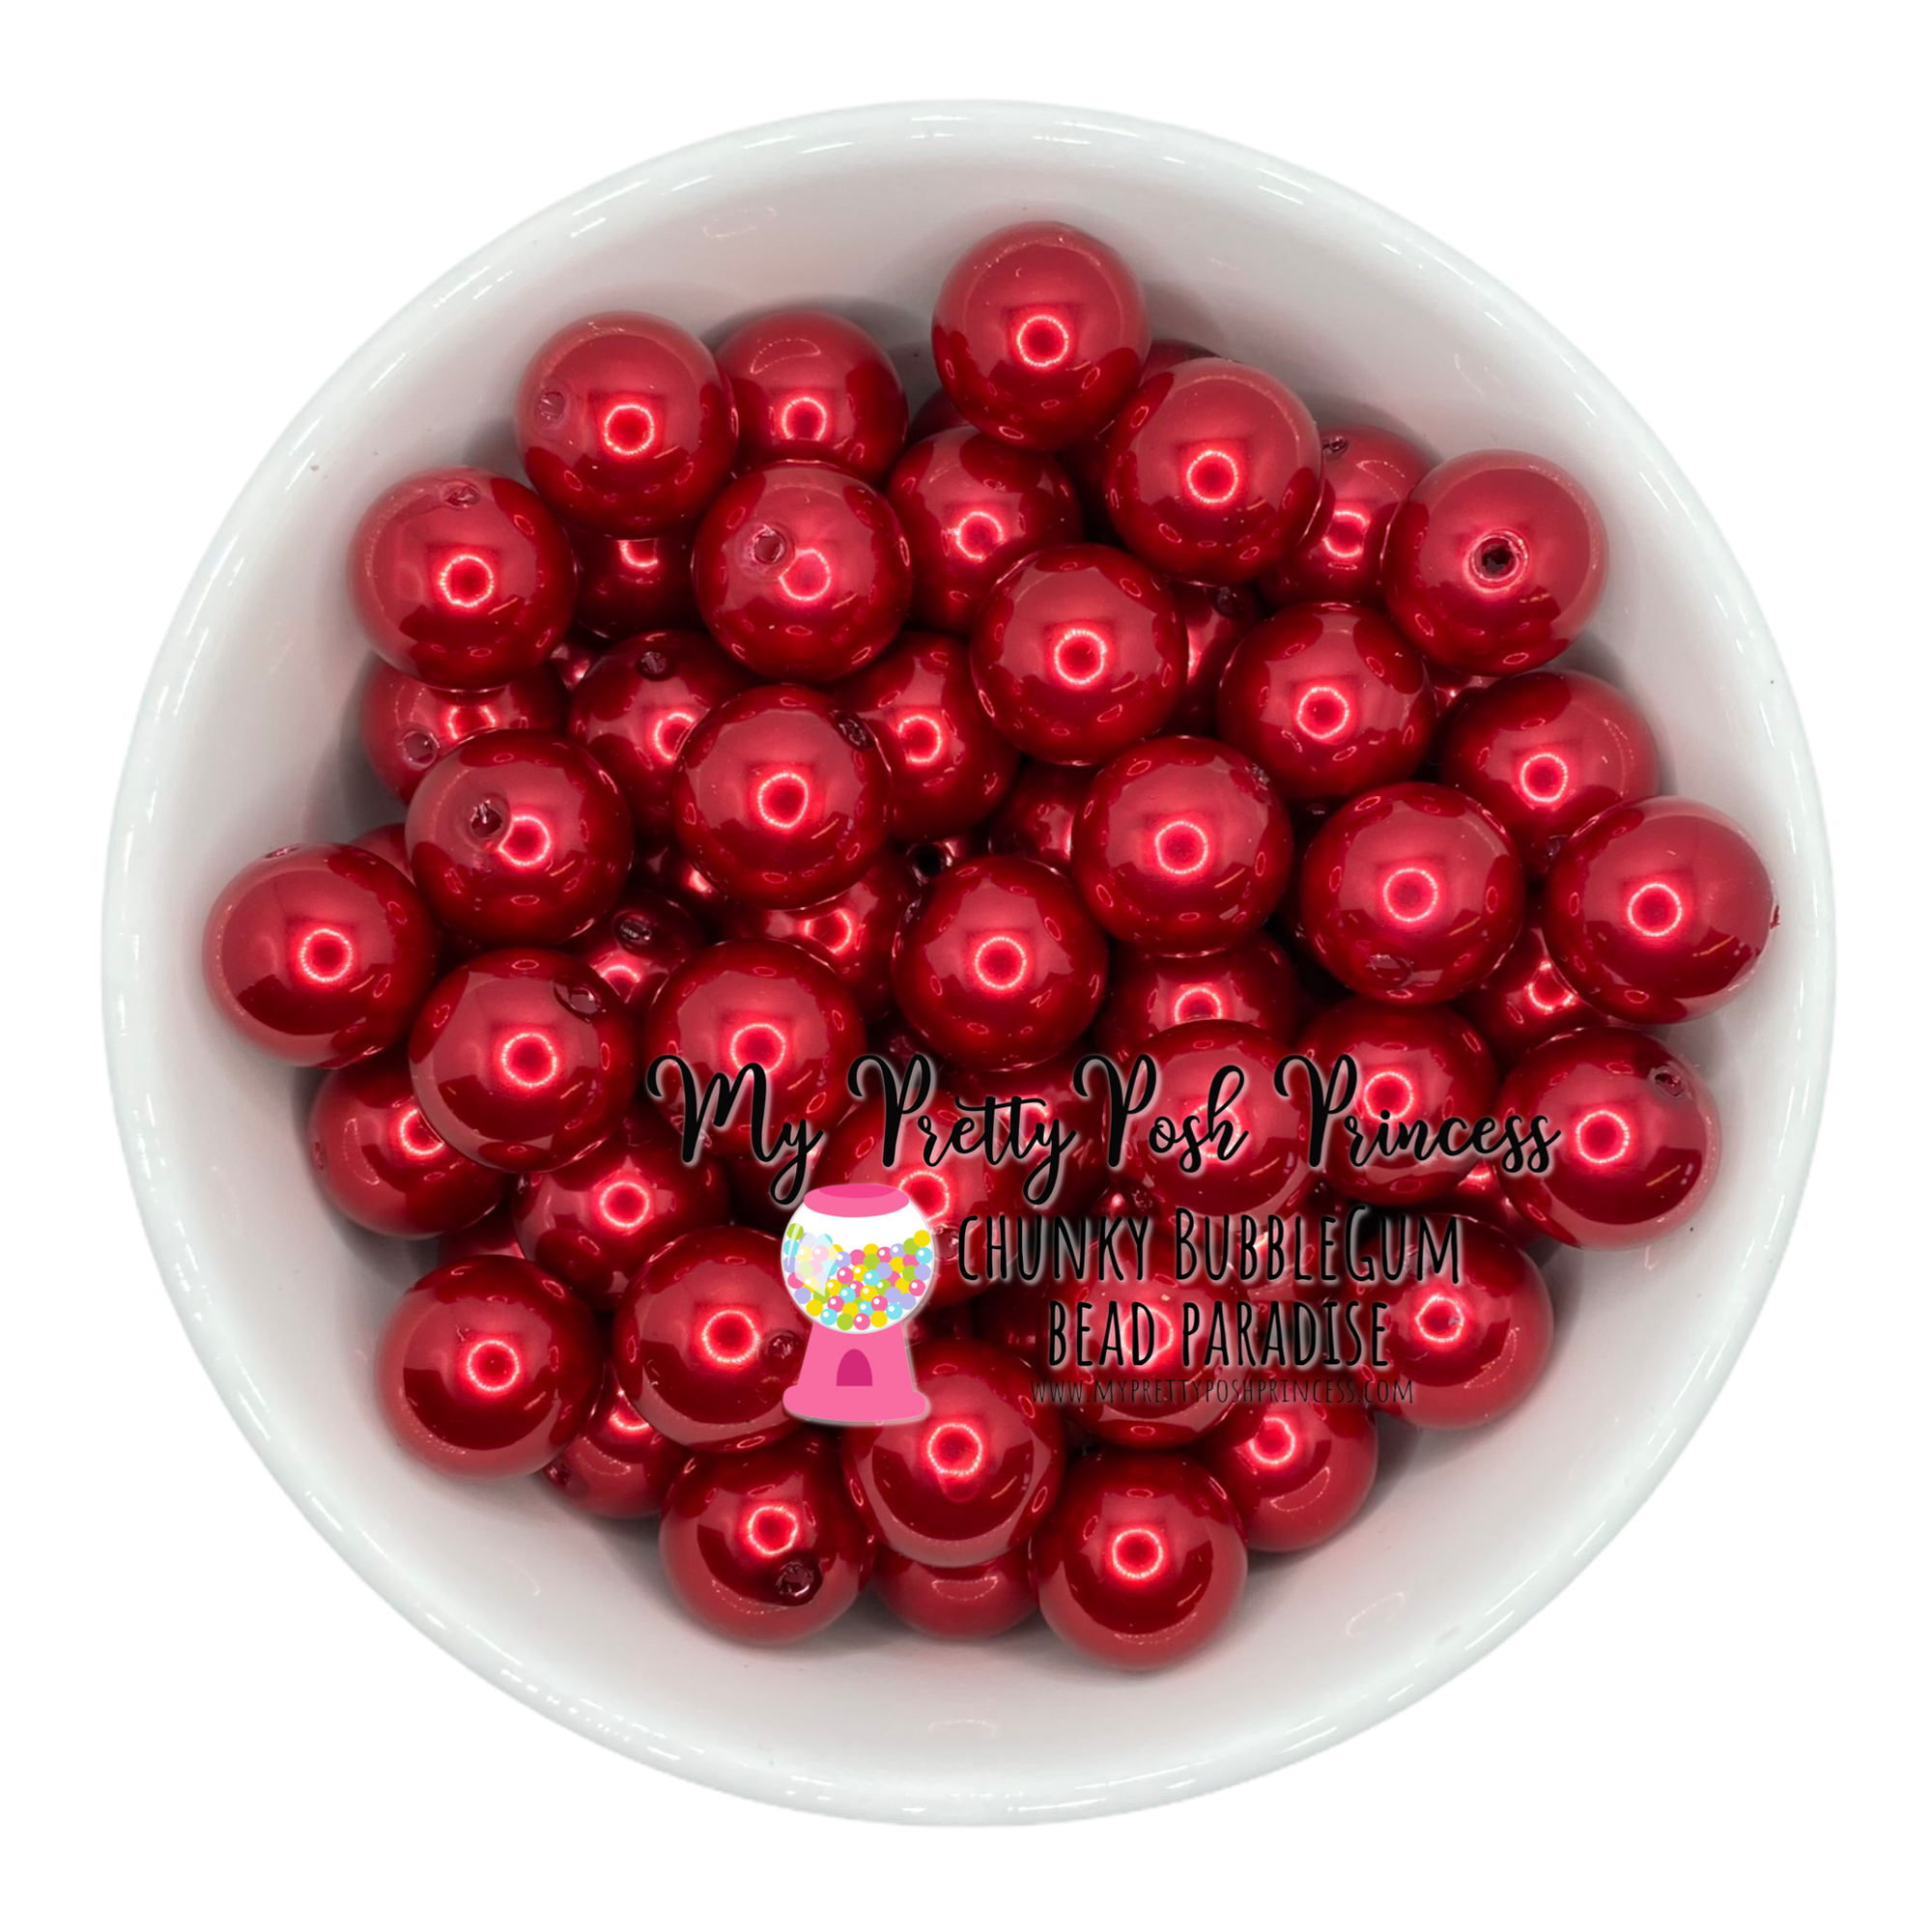 a60- 12mm Red Faux Pearl Chunky Bubble Gum Acrylic Beads (20 Count